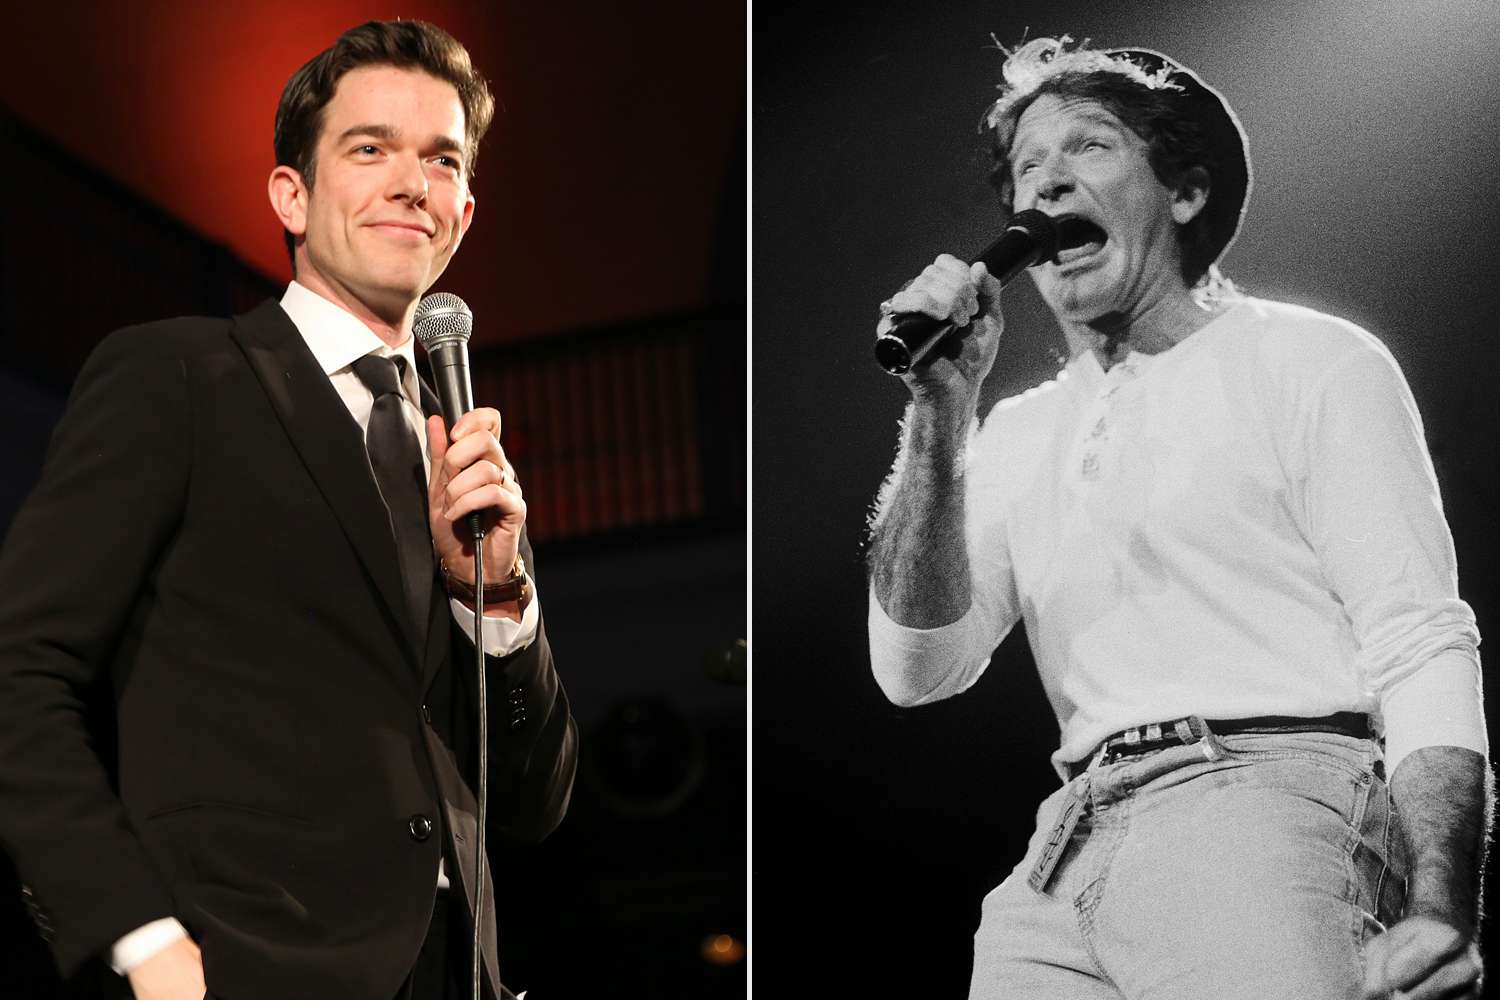 John Mulaney tells audience to 'f--- off' while dismissing theories about Robin Williams